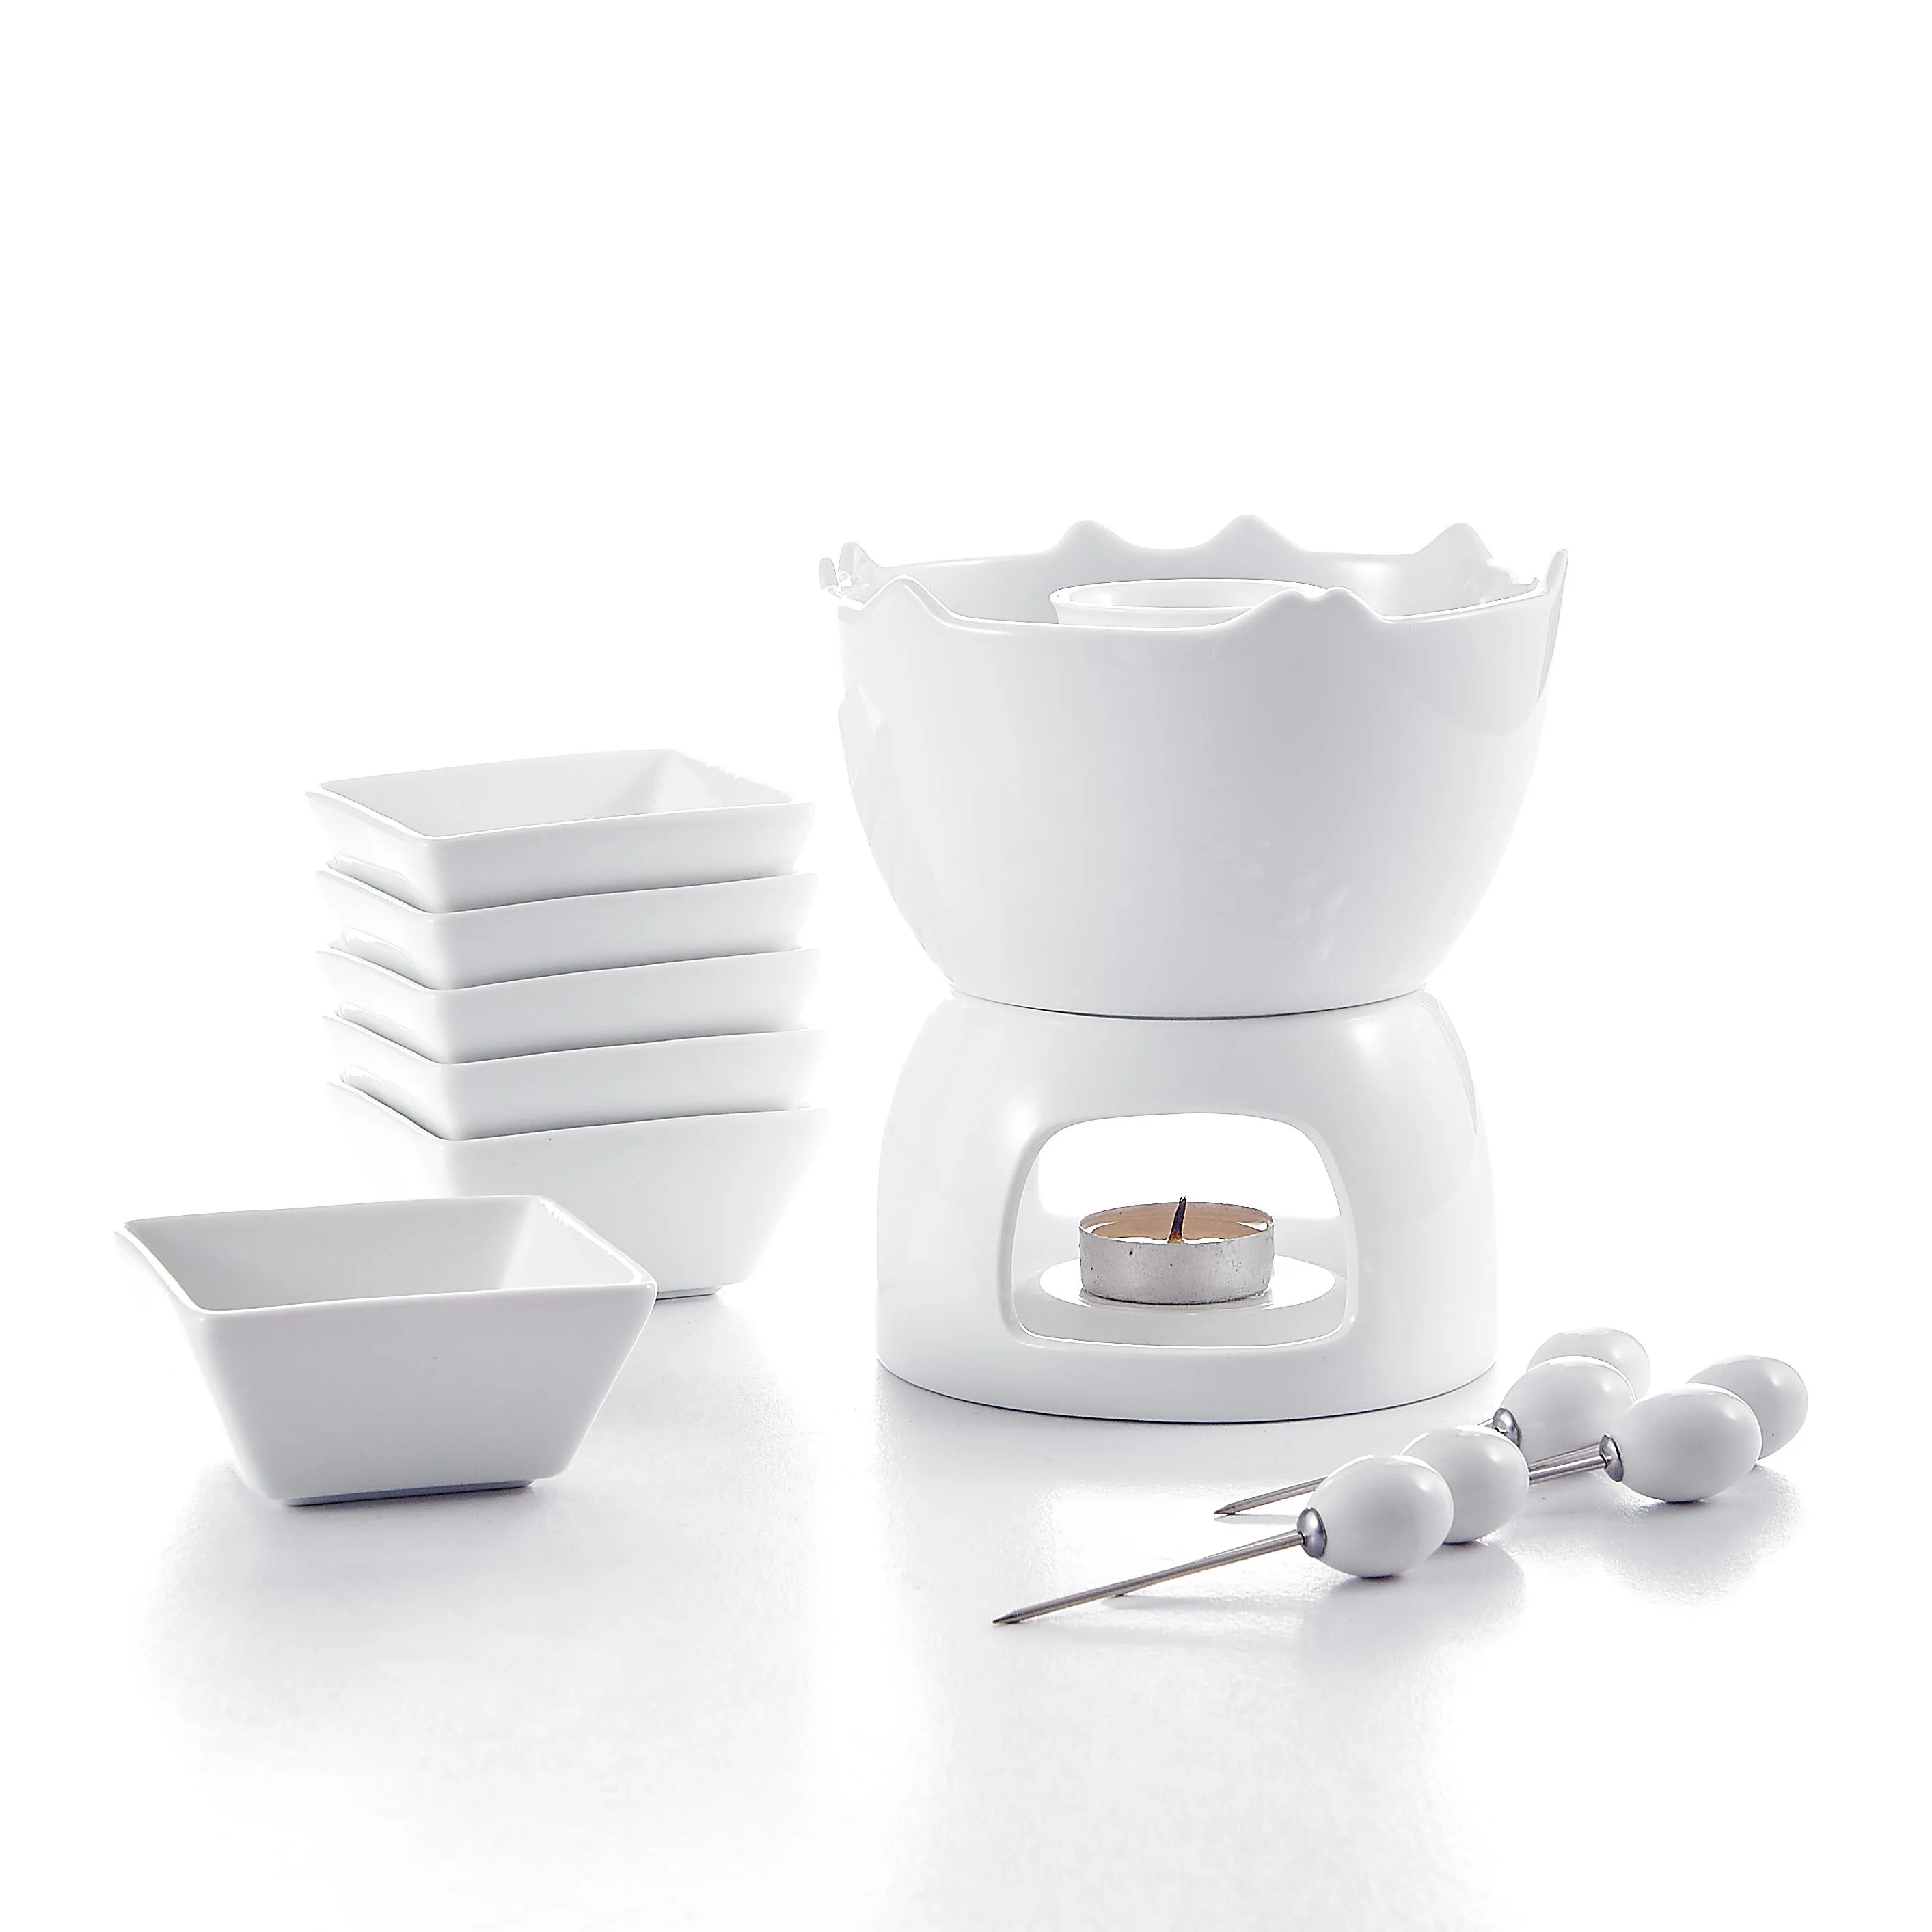 Cheese Fondue or Butter Fondue Set Malacasa Fondue Pot Set Two-layer Porcelain Tealight Chocolate Fondue with Dipping Bowls and Forks for 6 White 